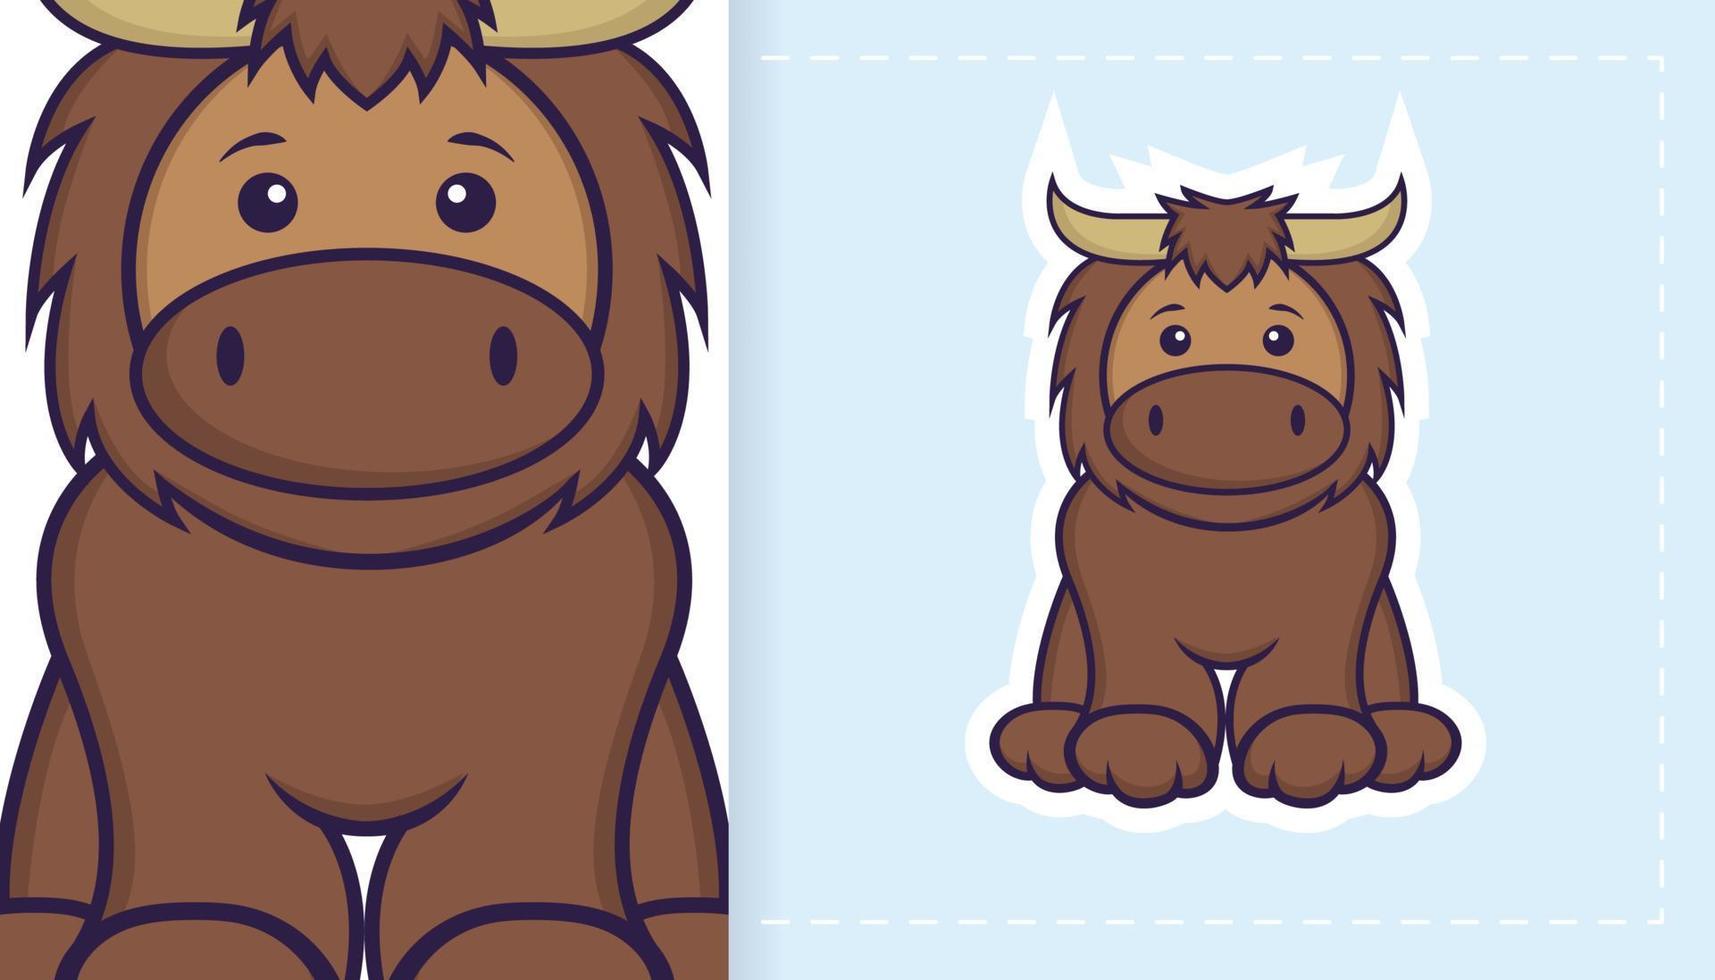 Cute bull mascot character. Can be used for stickers, patches, textiles, paper. Vector illustration